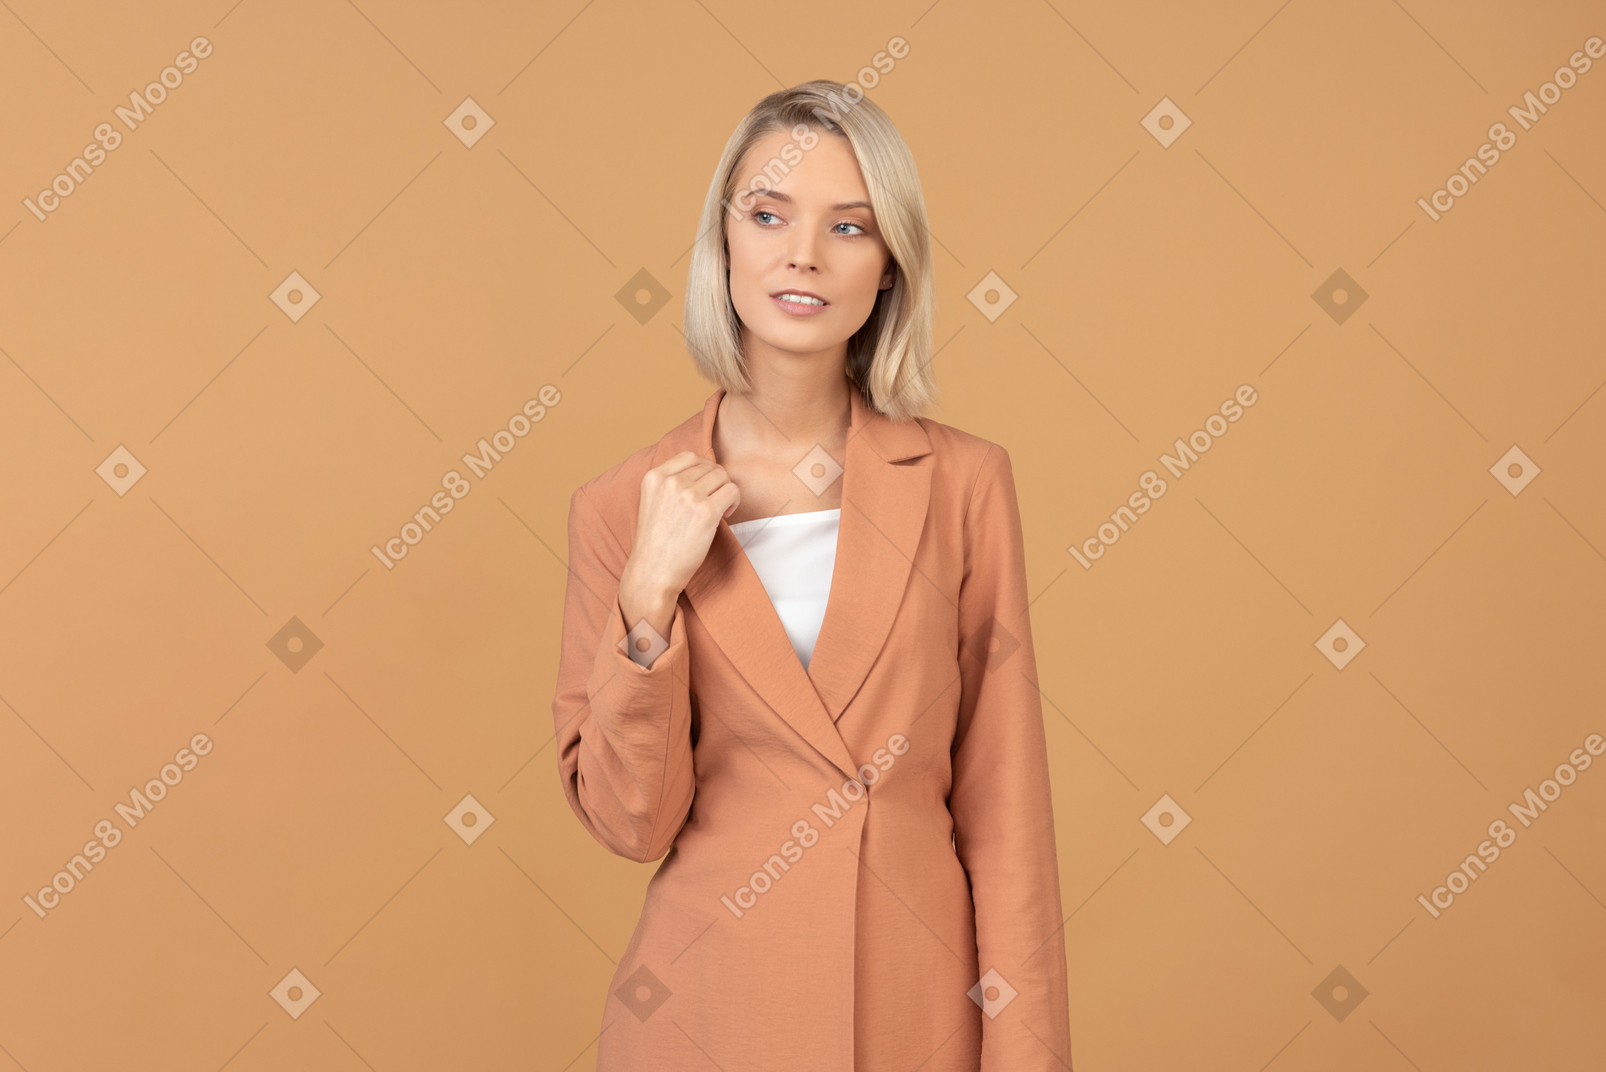 Pensive young woman in terracotta jacket